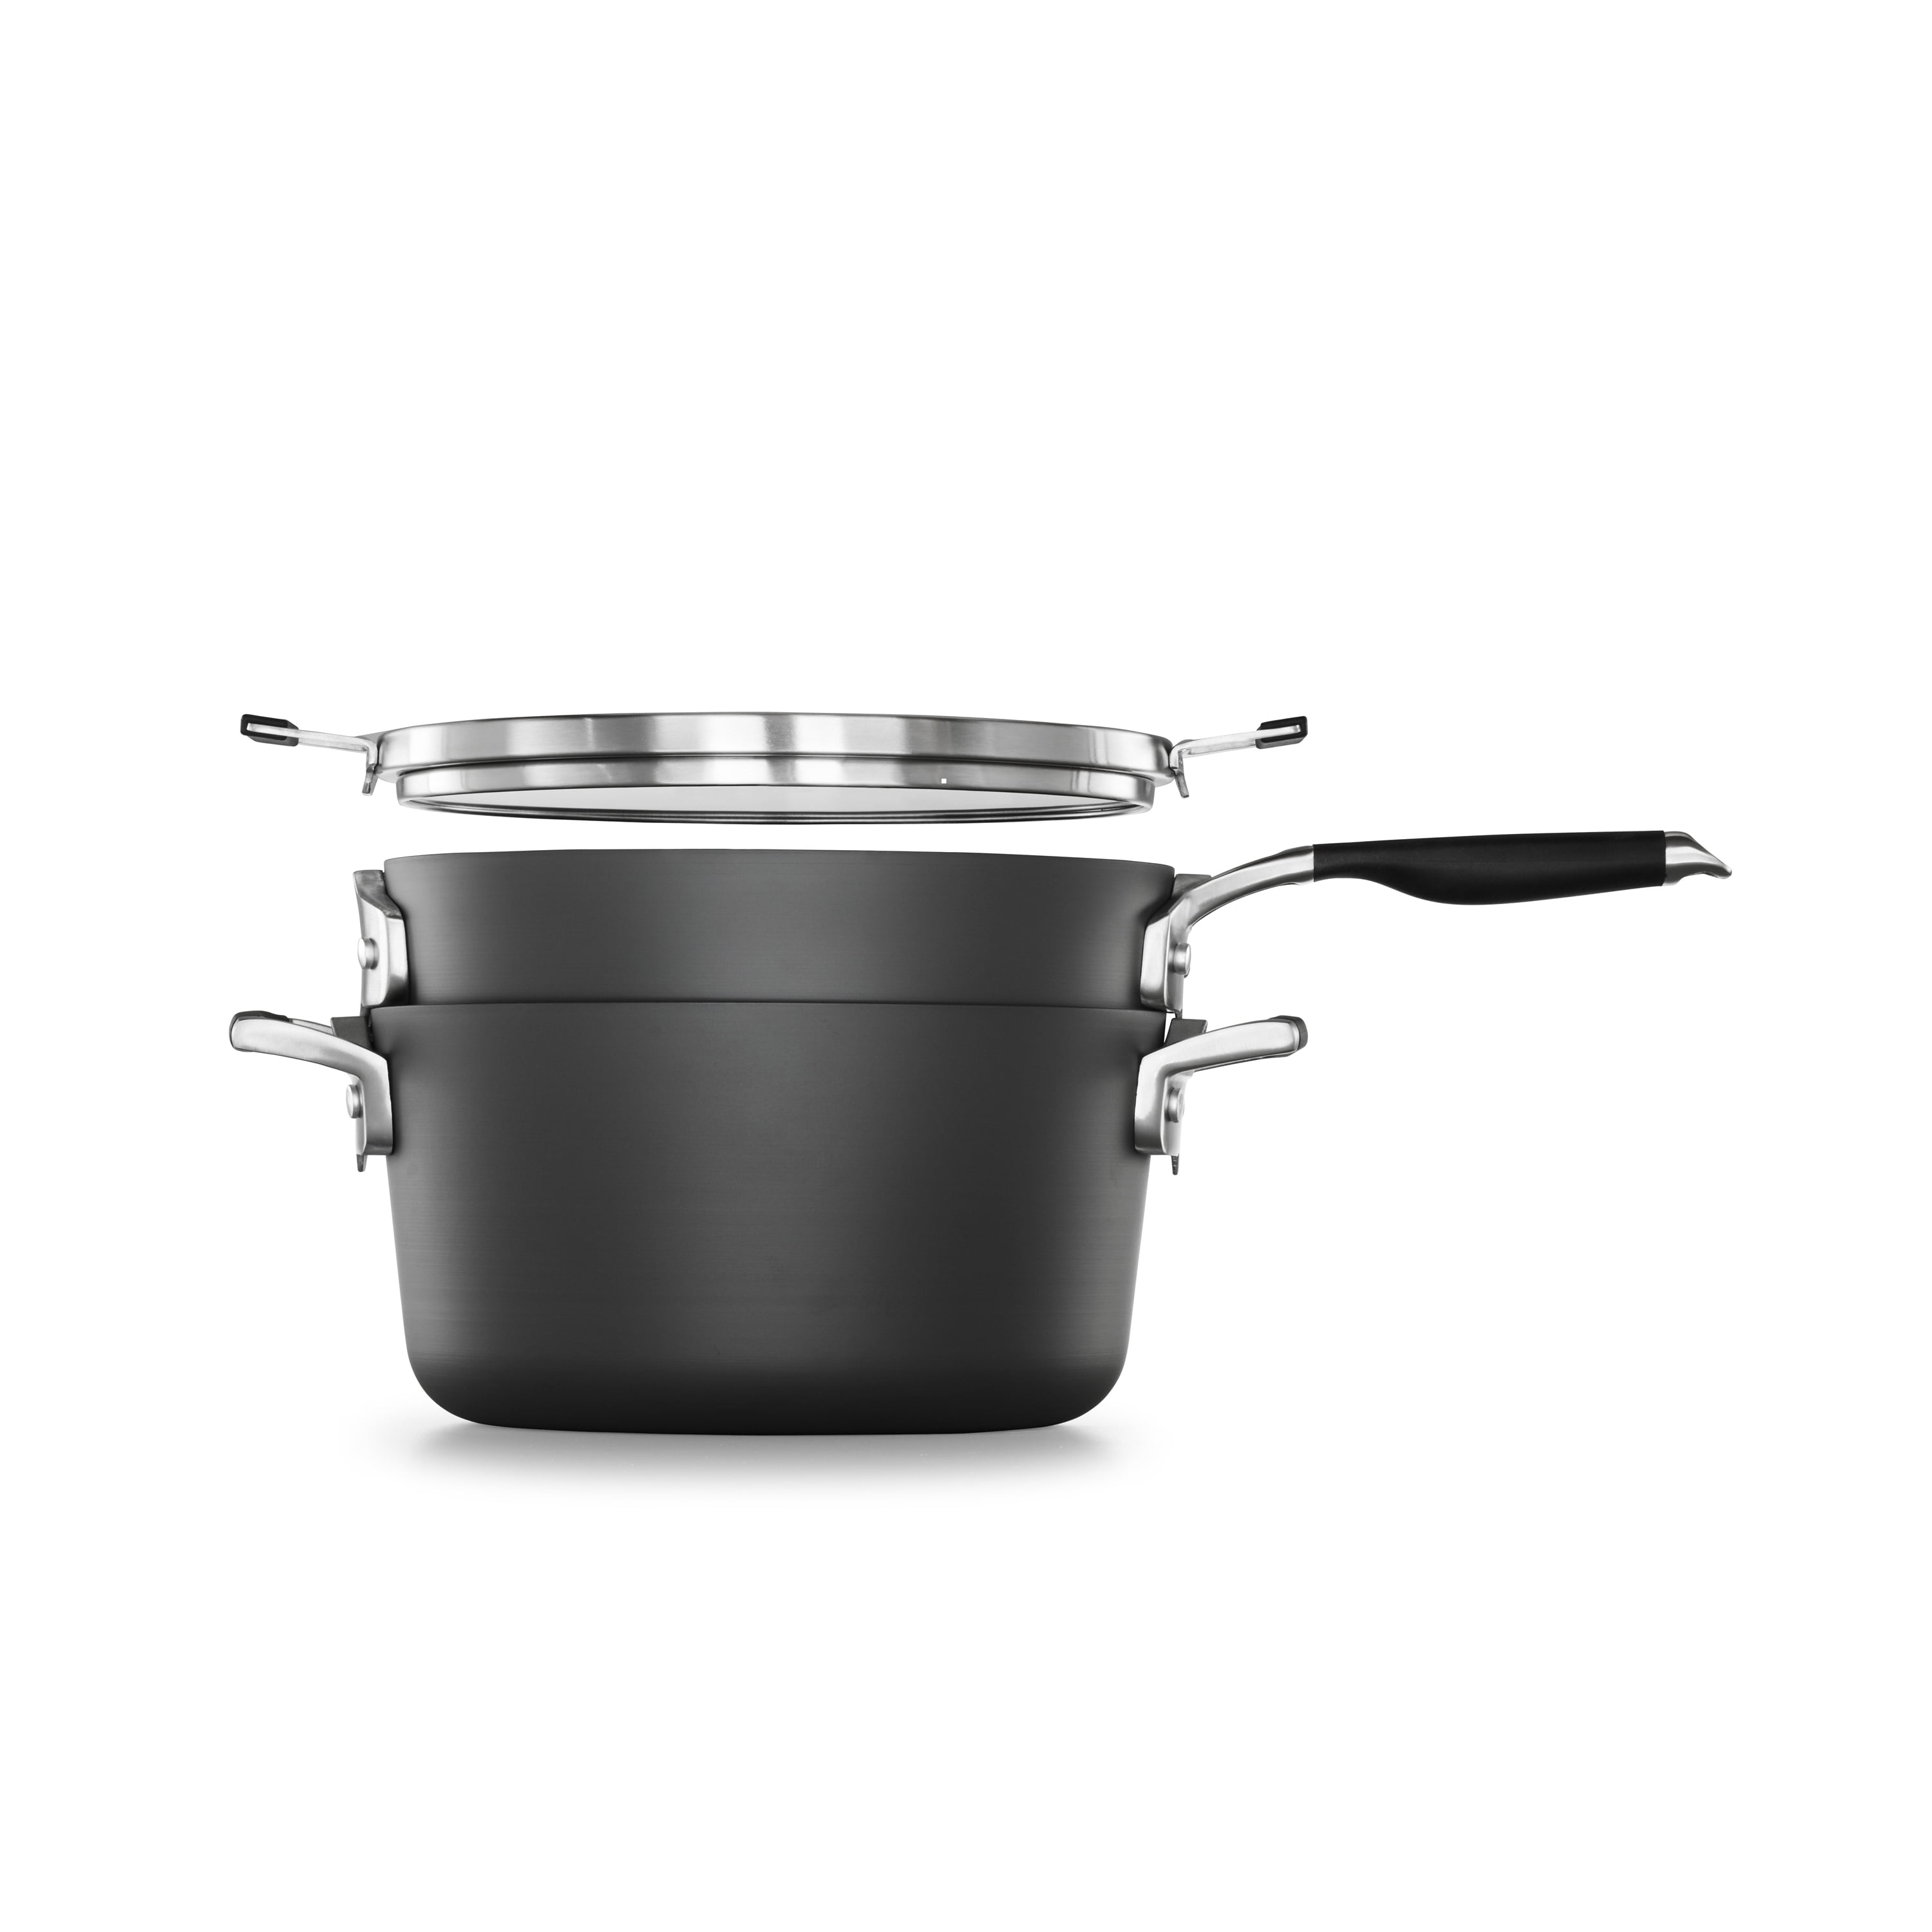 Calphalon Select Space Saving 3.5 qt. Hard-Anodized Aluminum Nonstick Sauce  Pan in Black with Glass Lid 2059879 - The Home Depot